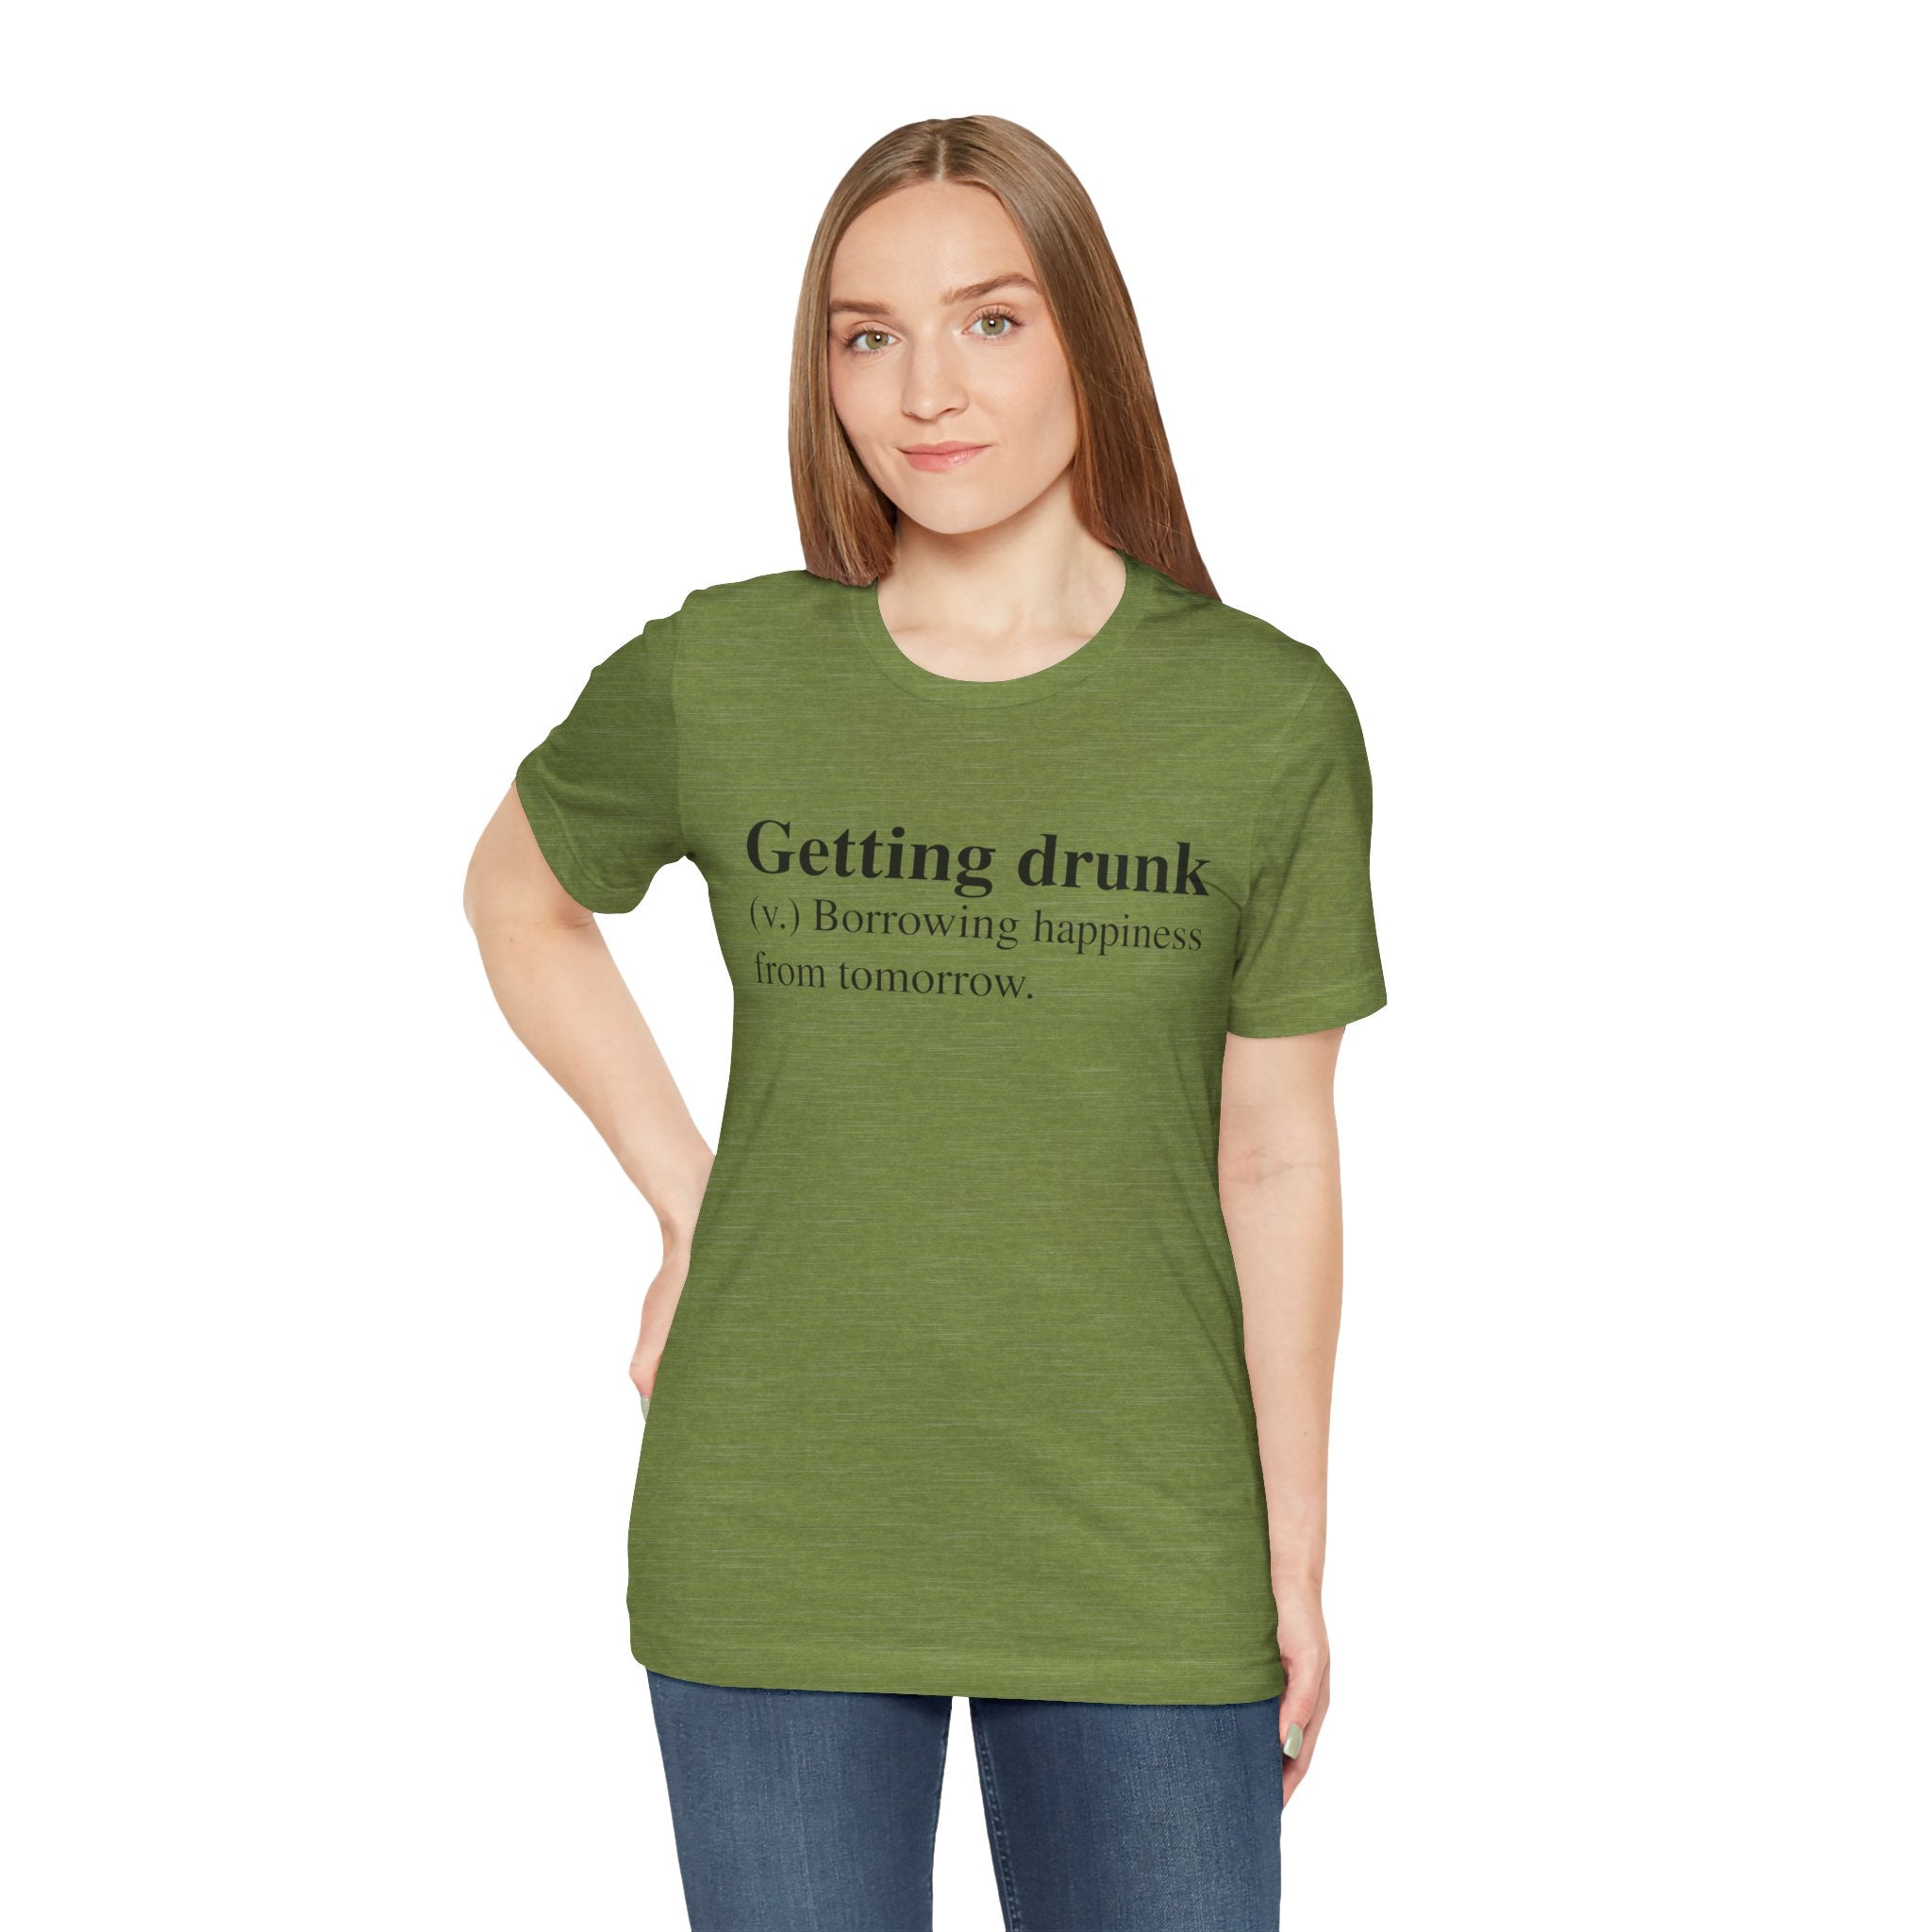 Young woman in a green, soft cotton Getting Drunk T-Shirt with the text "getting drunk (v.) borrowing happiness from tomorrow.